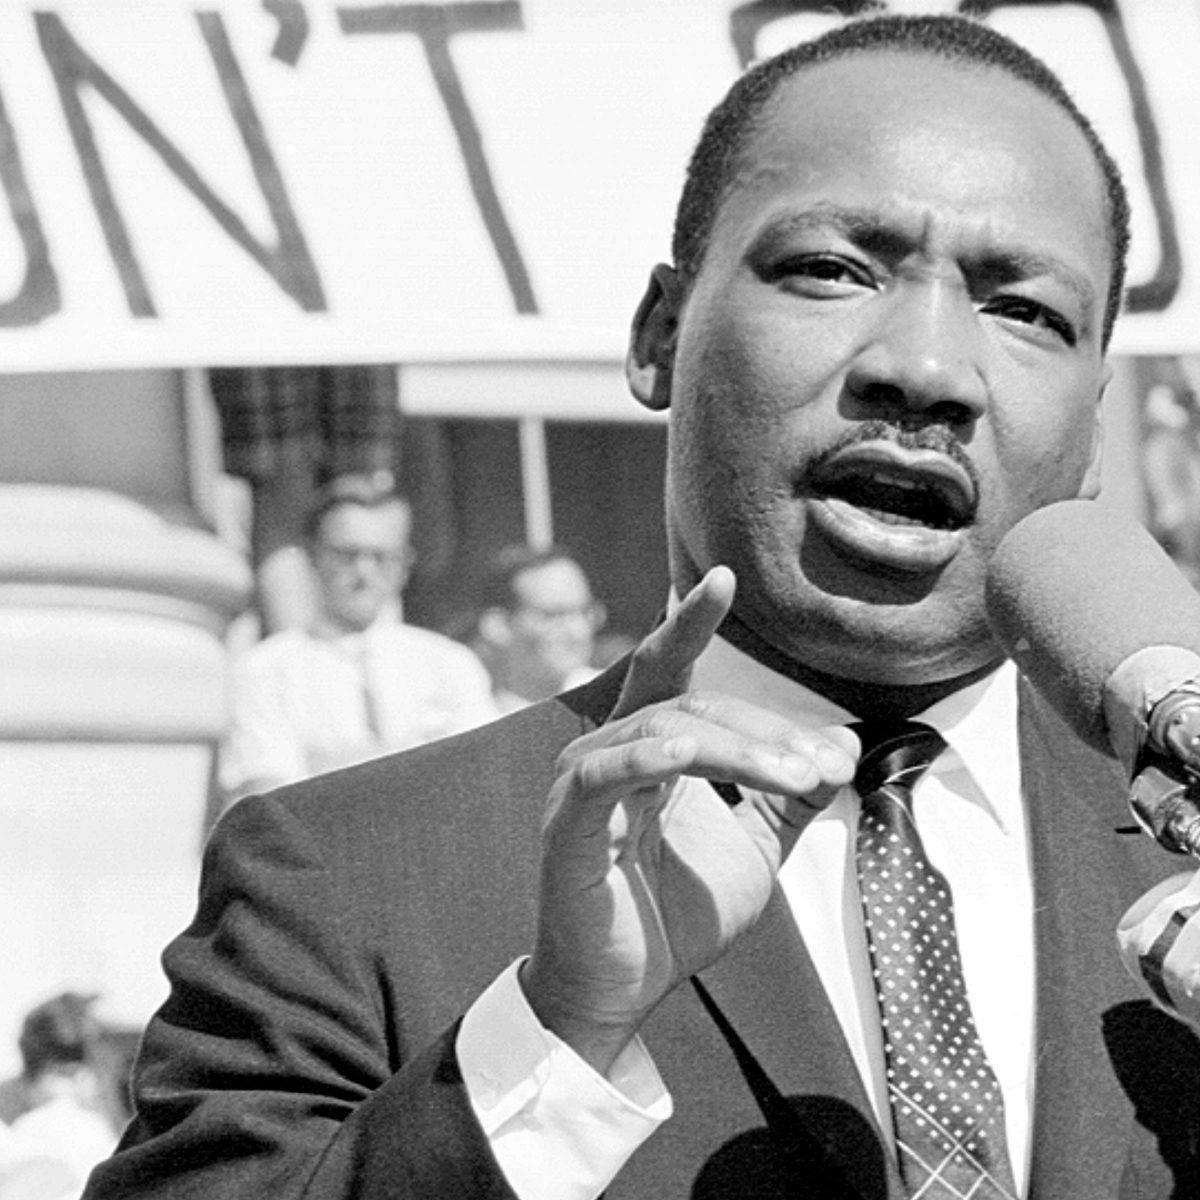 Right-Wing “Moms for Liberty” Group Wants ‘Anti-American’ MLK Jr. Book Banned From Schools